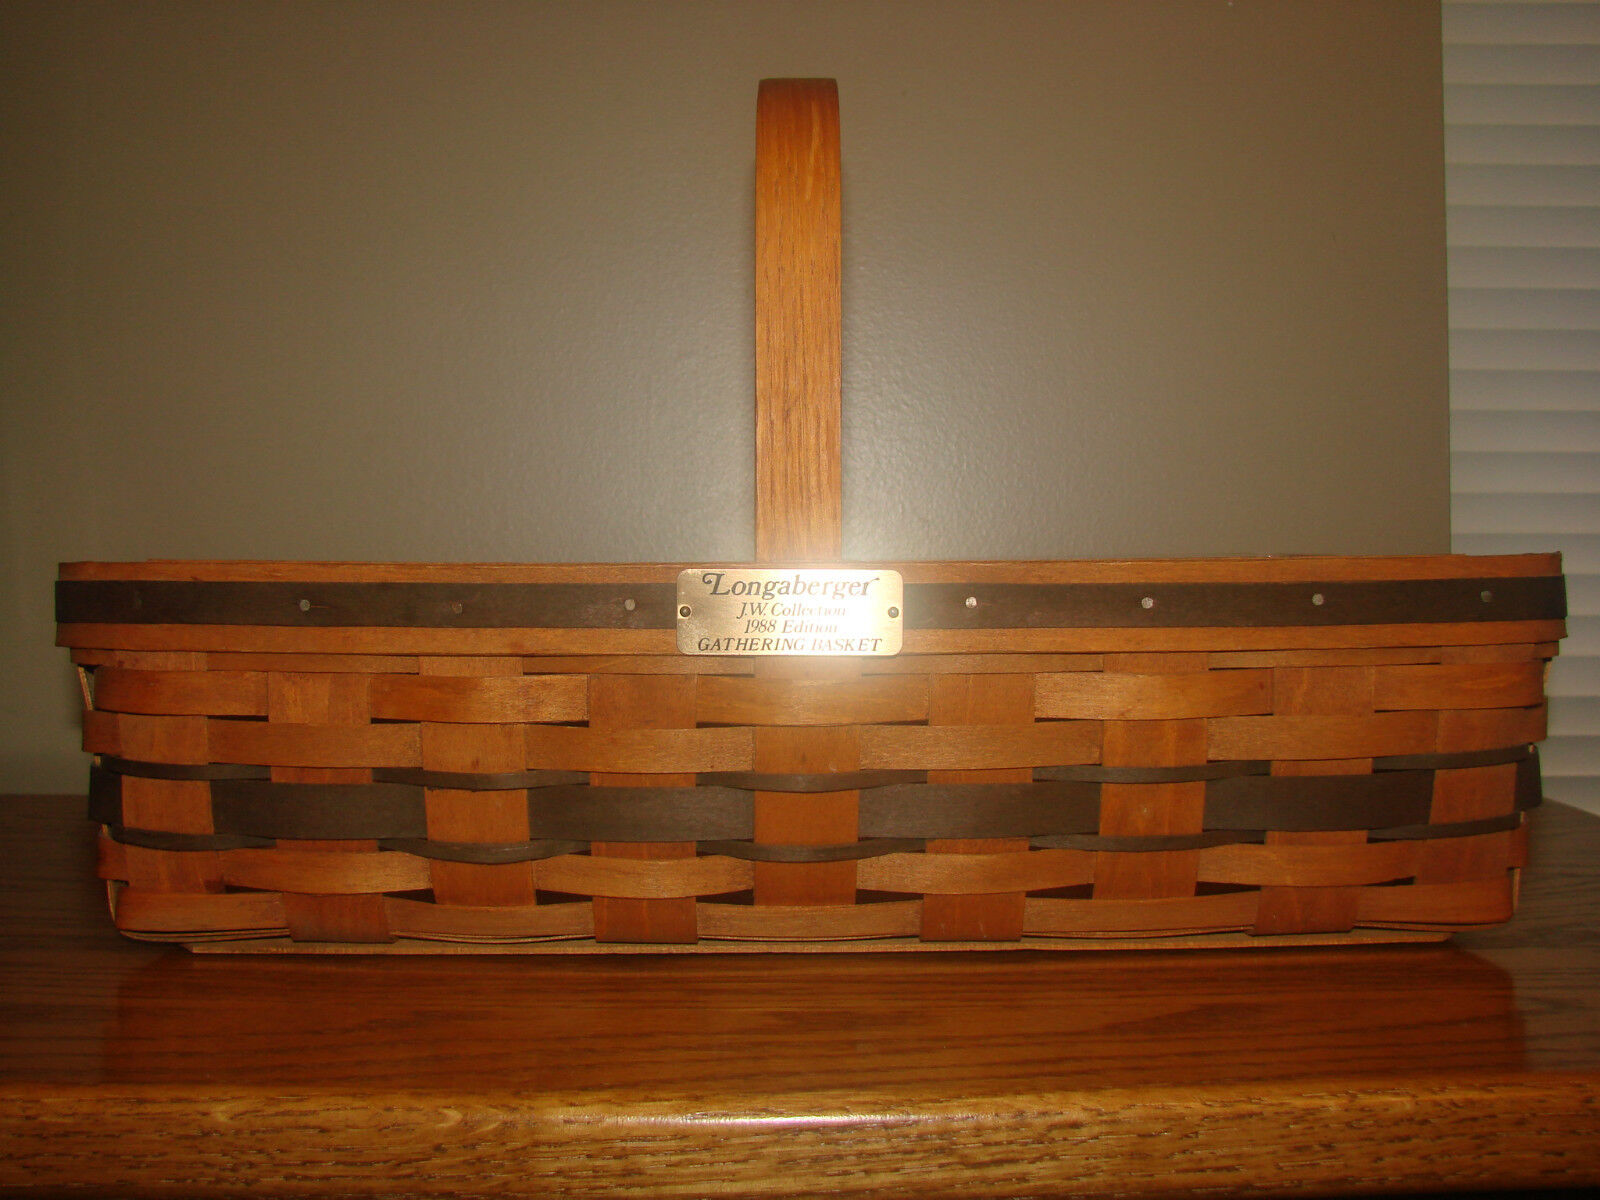 Longaberger JW COLLECTION 1988 Medium GATHERING Basket With Protector & Product 